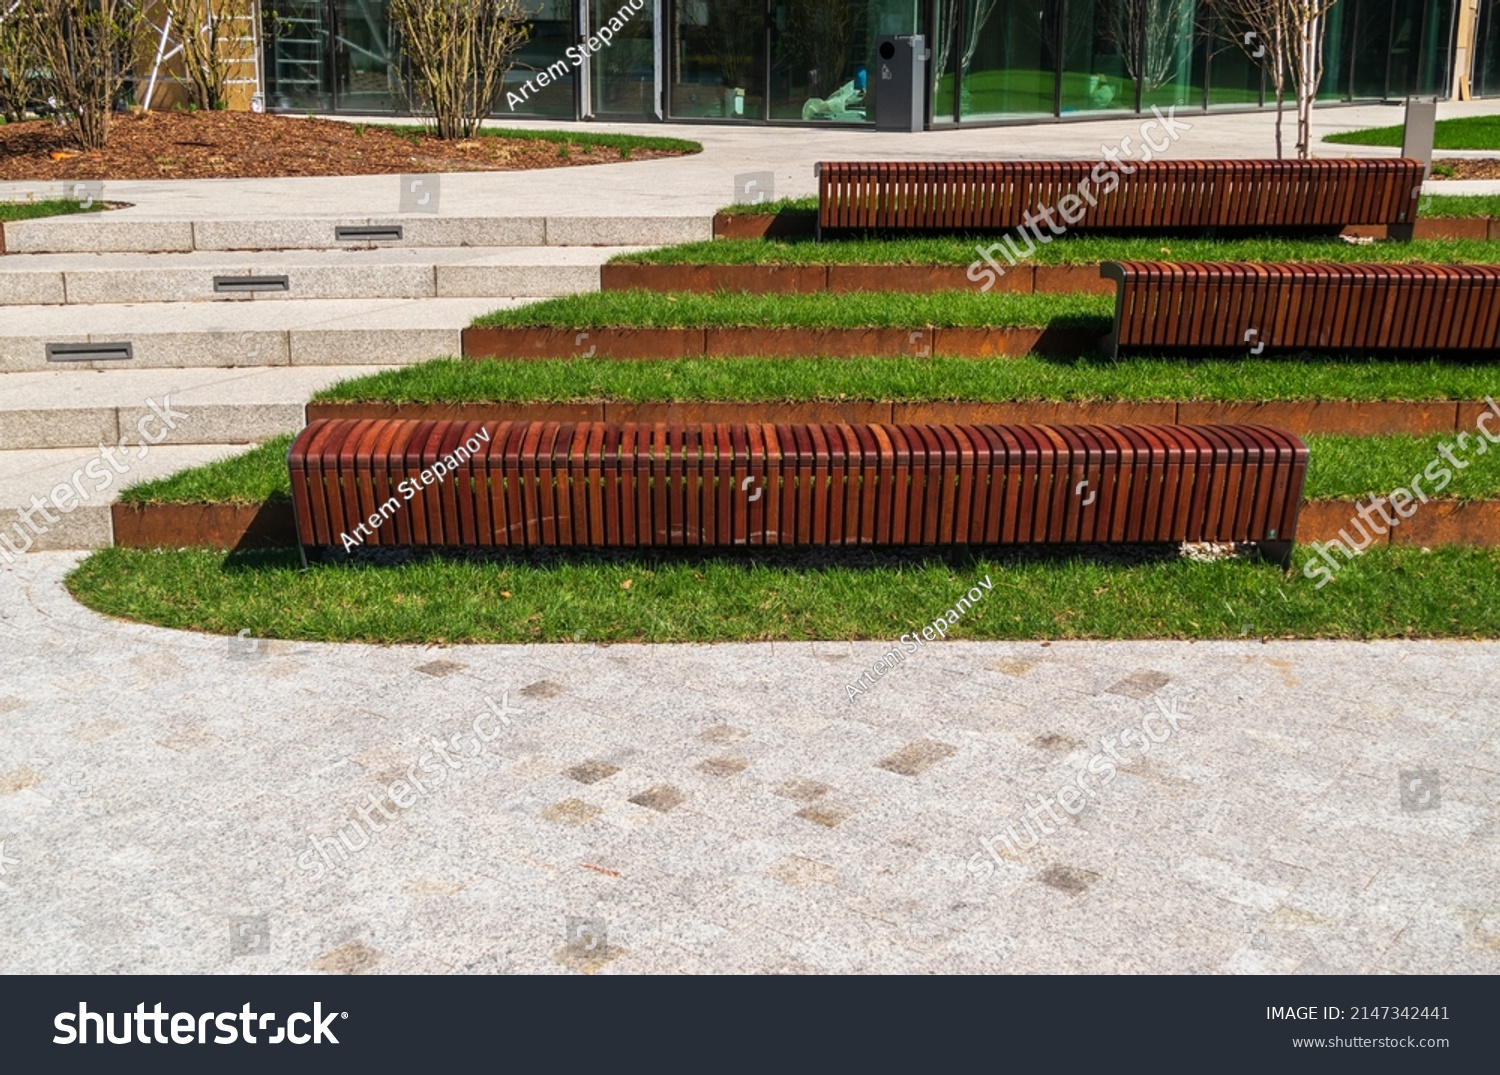 New modern bench in park. Outdoor city architecture, wooden benches, outdoor chair, urban public furniture, empty plank seat, comfortable bench in recreation area #2147342441